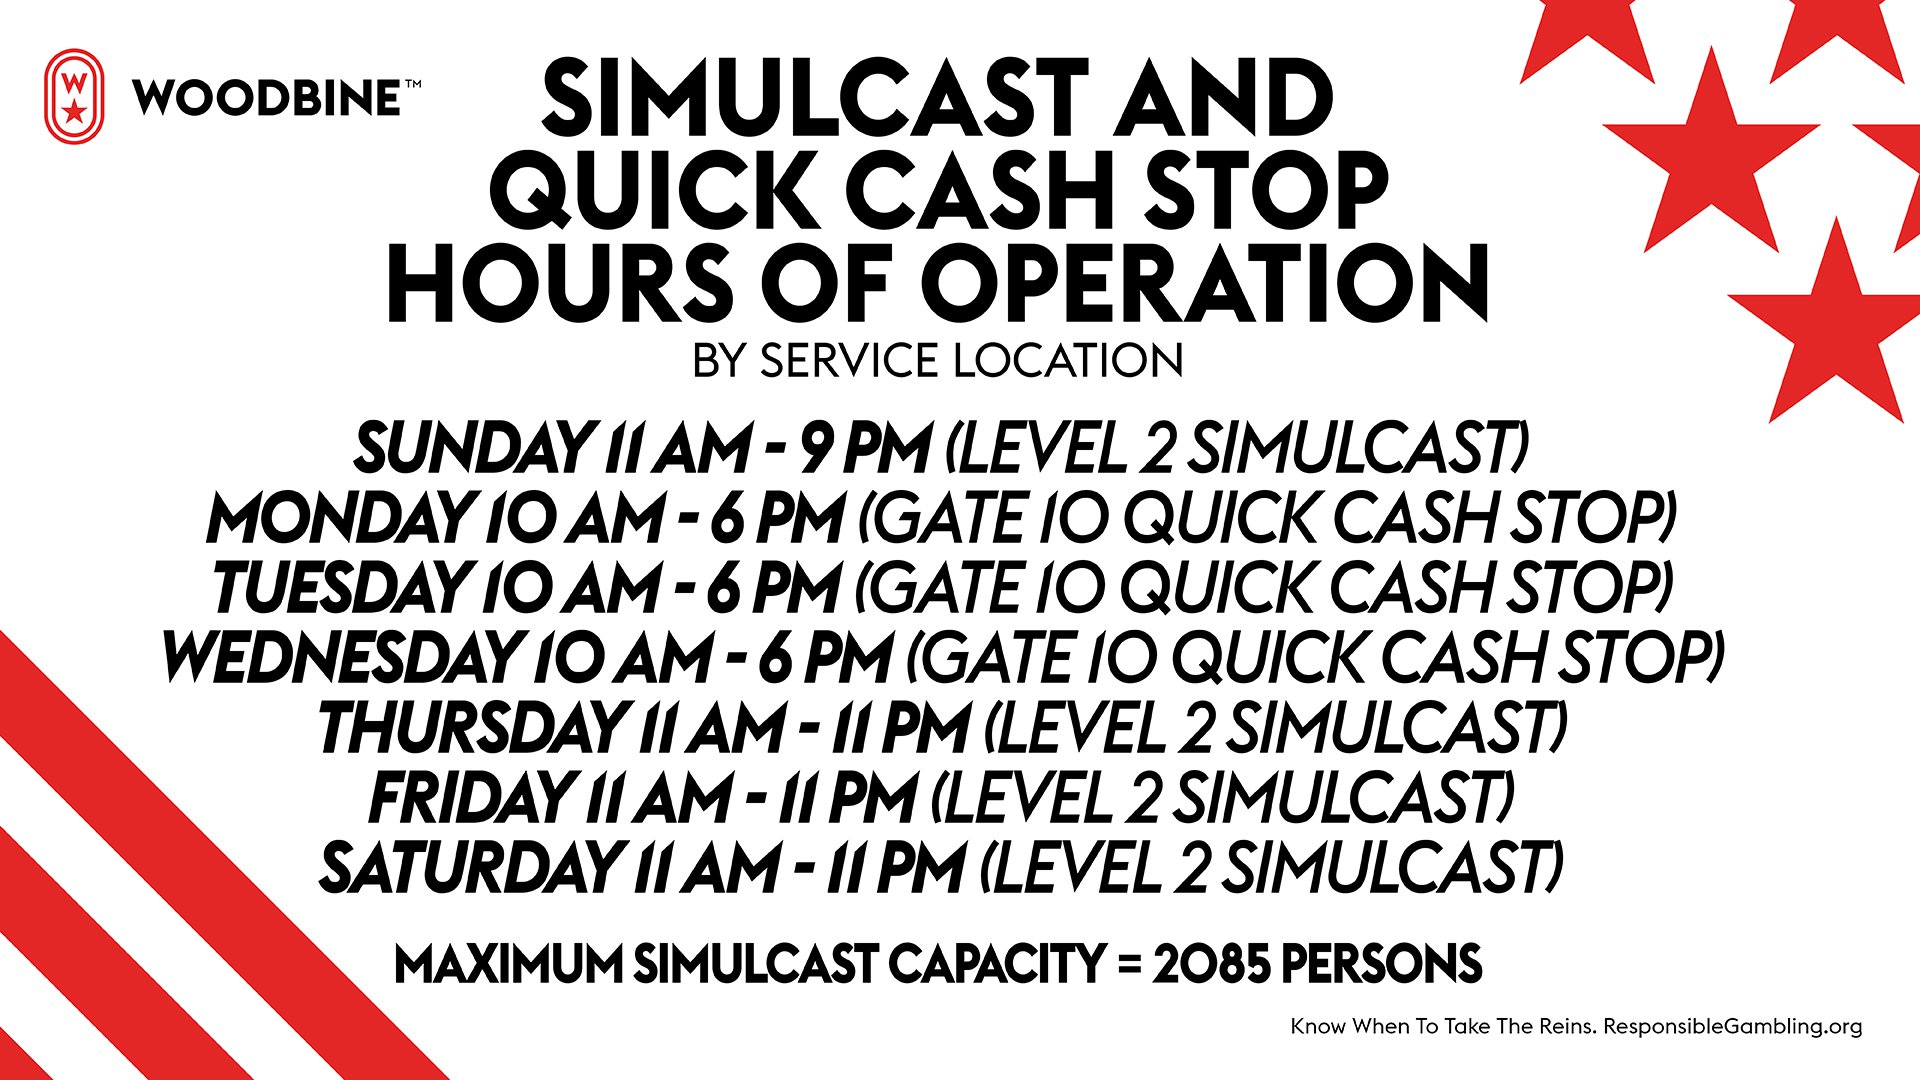 Simulcast and Quick Cash Stop Services are available at Woodbine Racetrack.